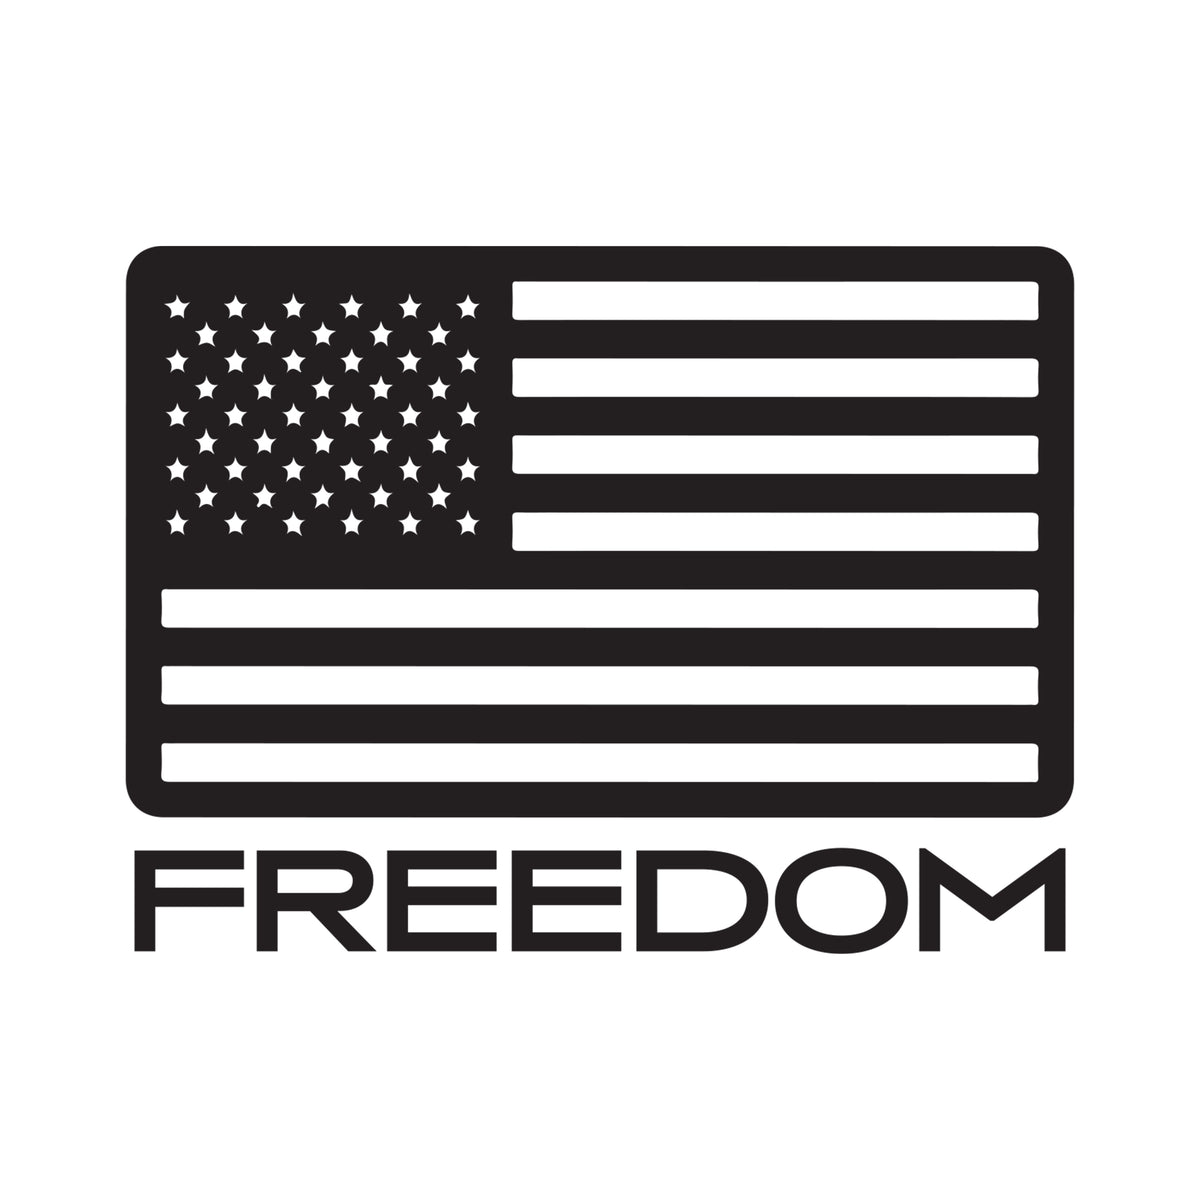 Freedom Flag Chest Seal Military Tee